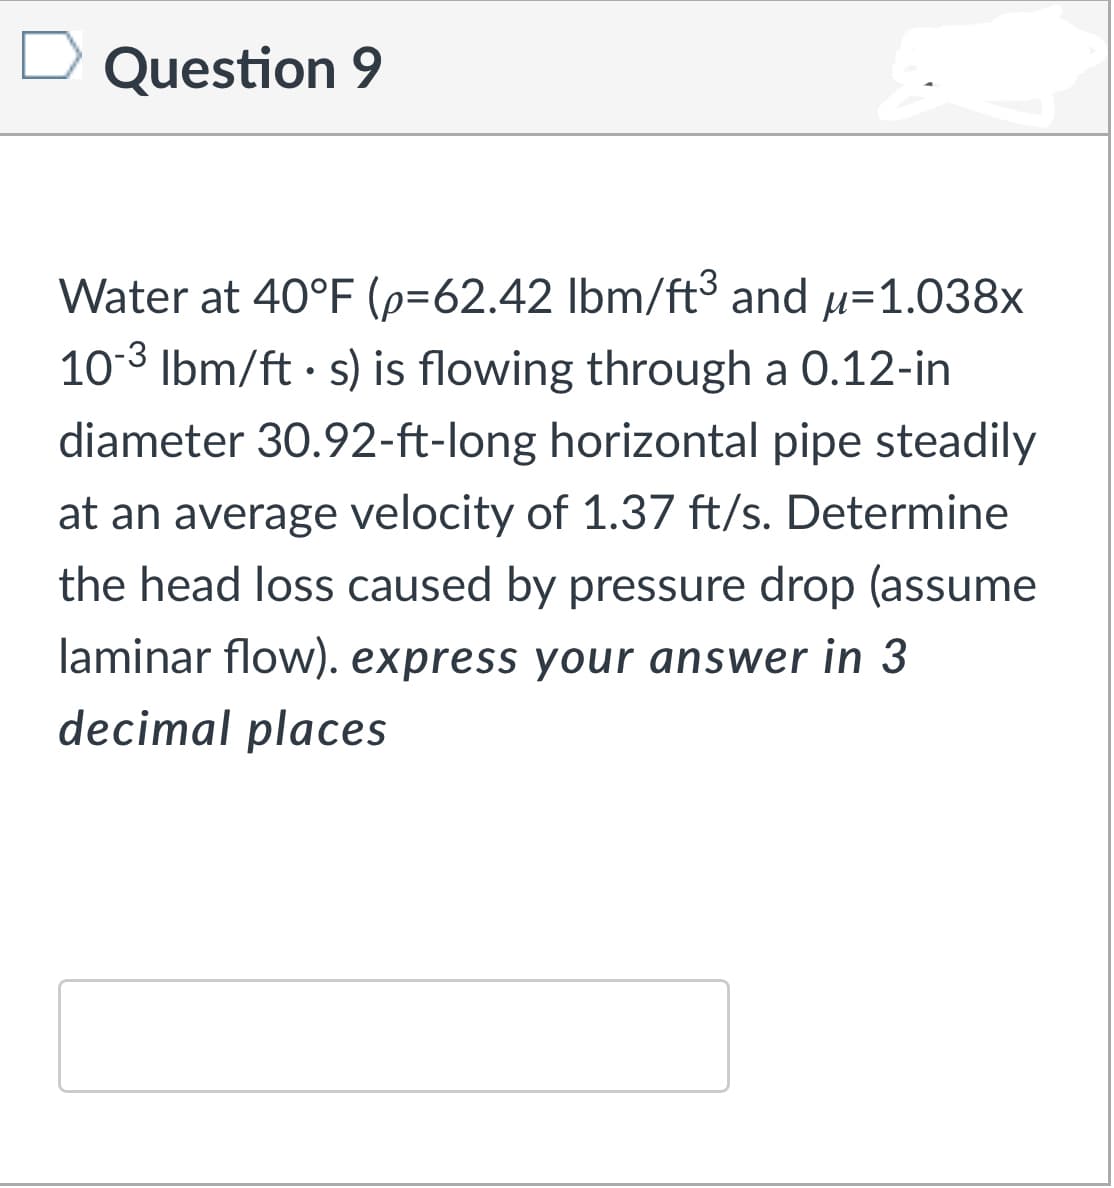 Question 9
Water at 40°F (p=62.42 lbm/ft3 and u=1.038x
10-3
Ibm/ft · s) is flowing through a 0.12-in
diameter 30.92-ft-long horizontal pipe steadily
at an average velocity of 1.37 ft/s. Determine
the head loss caused by pressure drop (assume
laminar flow). express your answer in 3
decimal places
